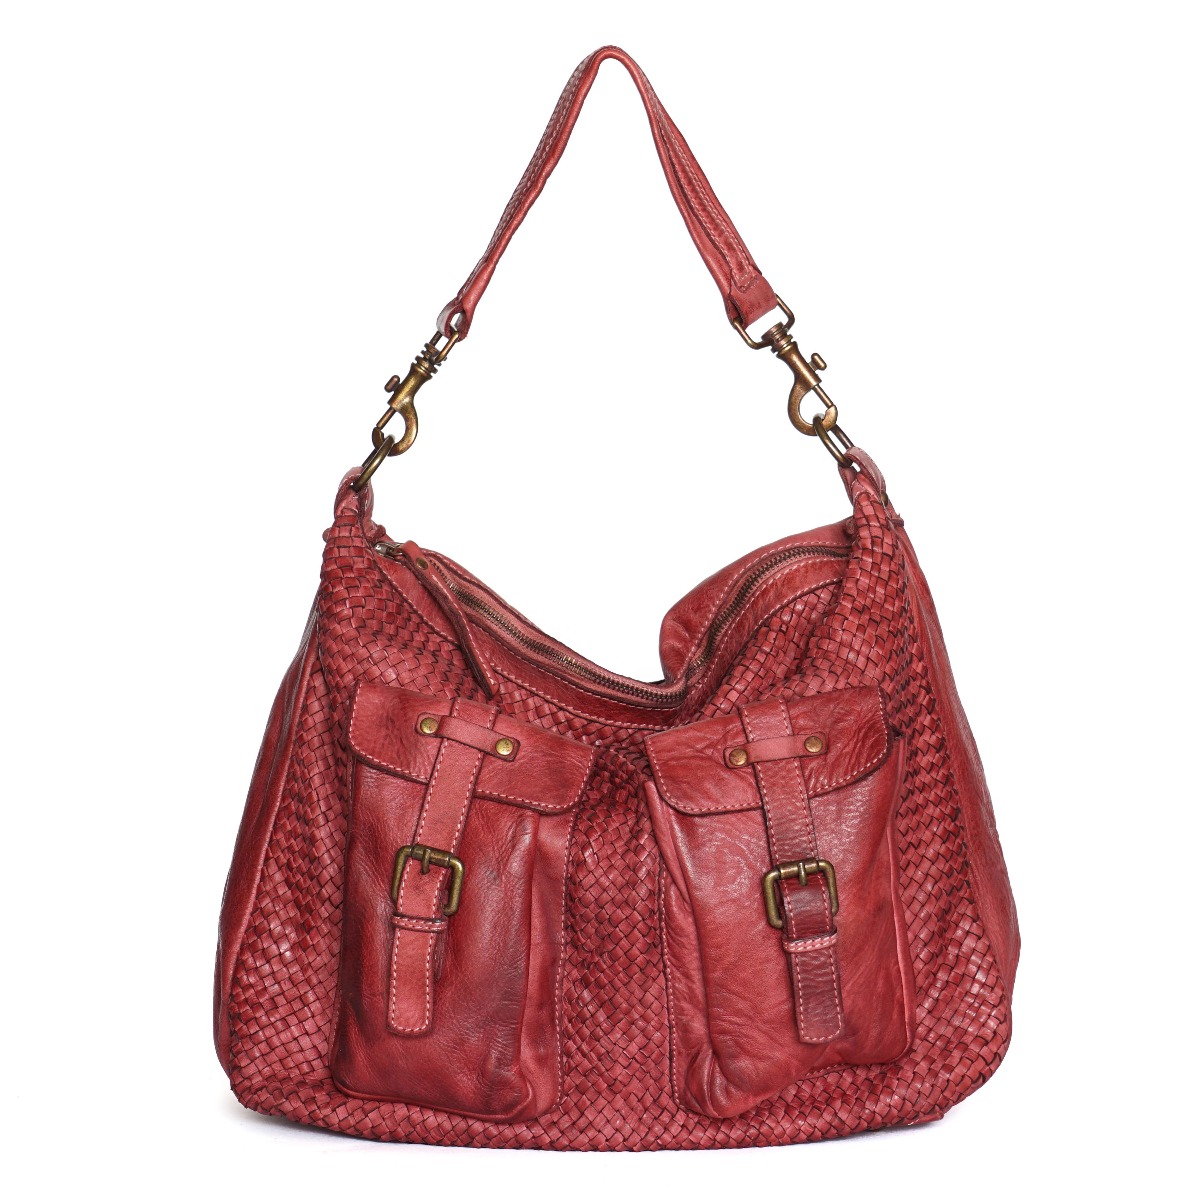 Leather woven bag women